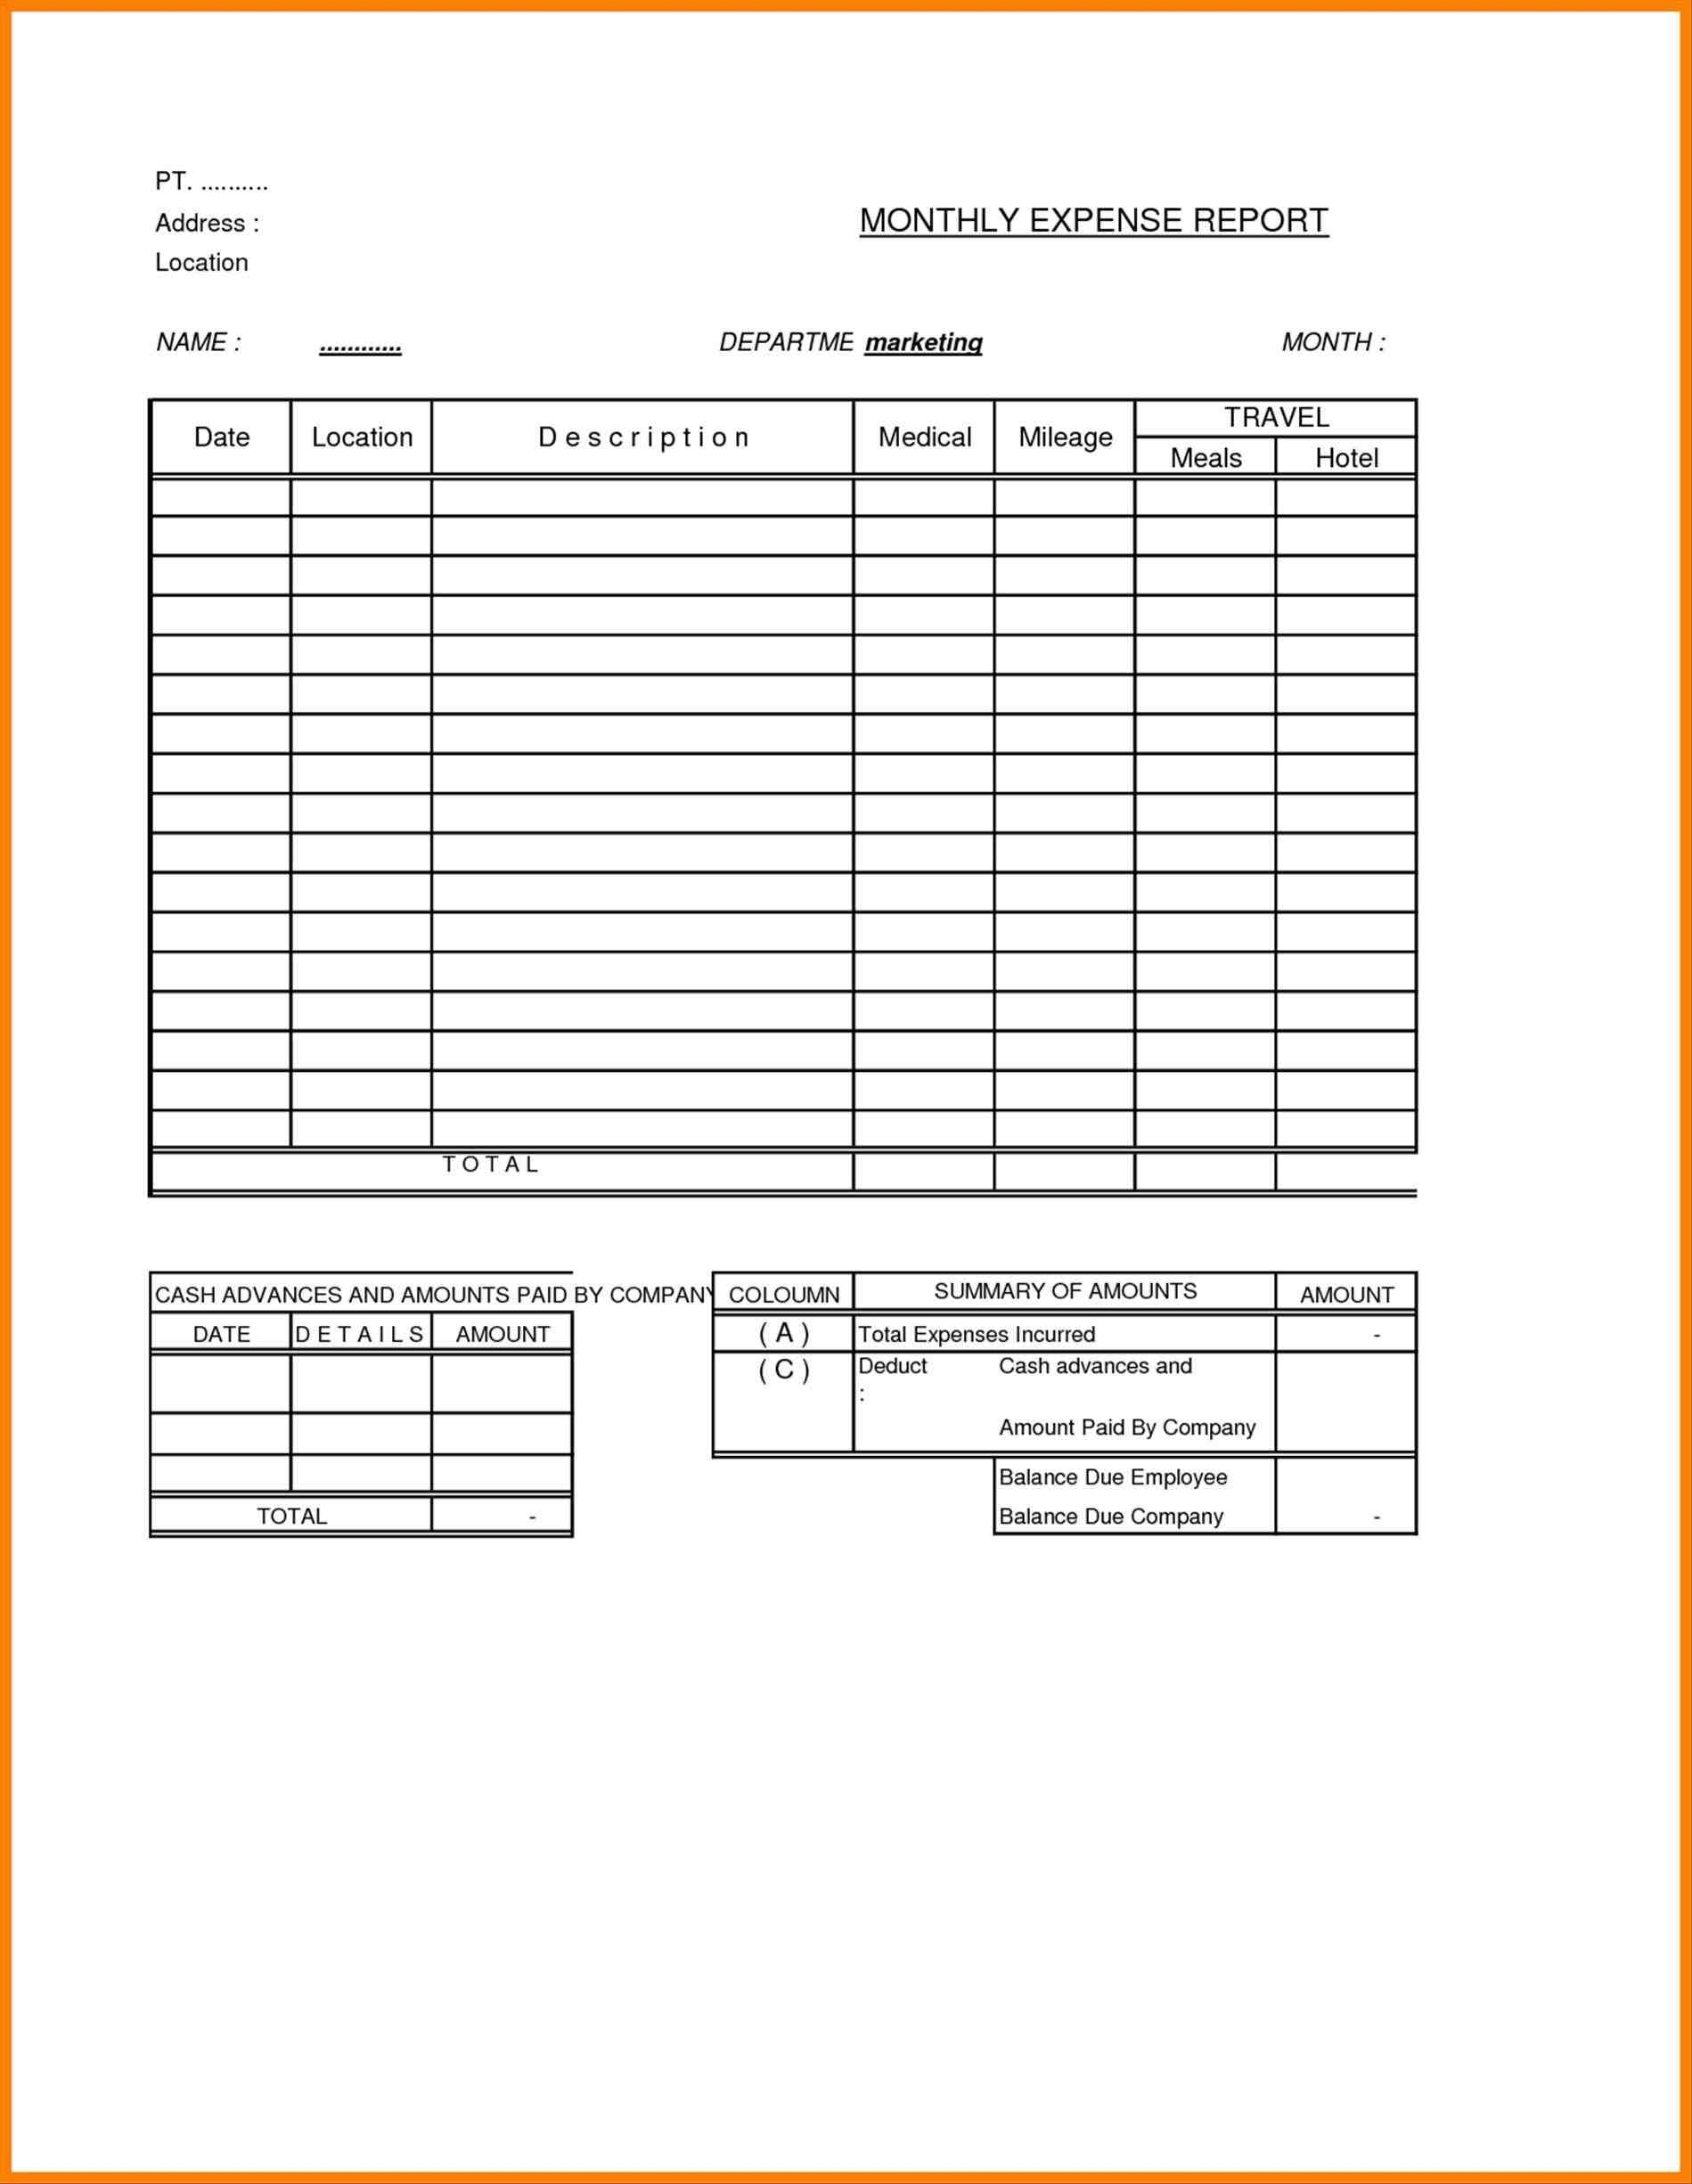 Monthly Expense Report Template - Sample Templates - Sample Templates In Monthly Expense Report Template Excel